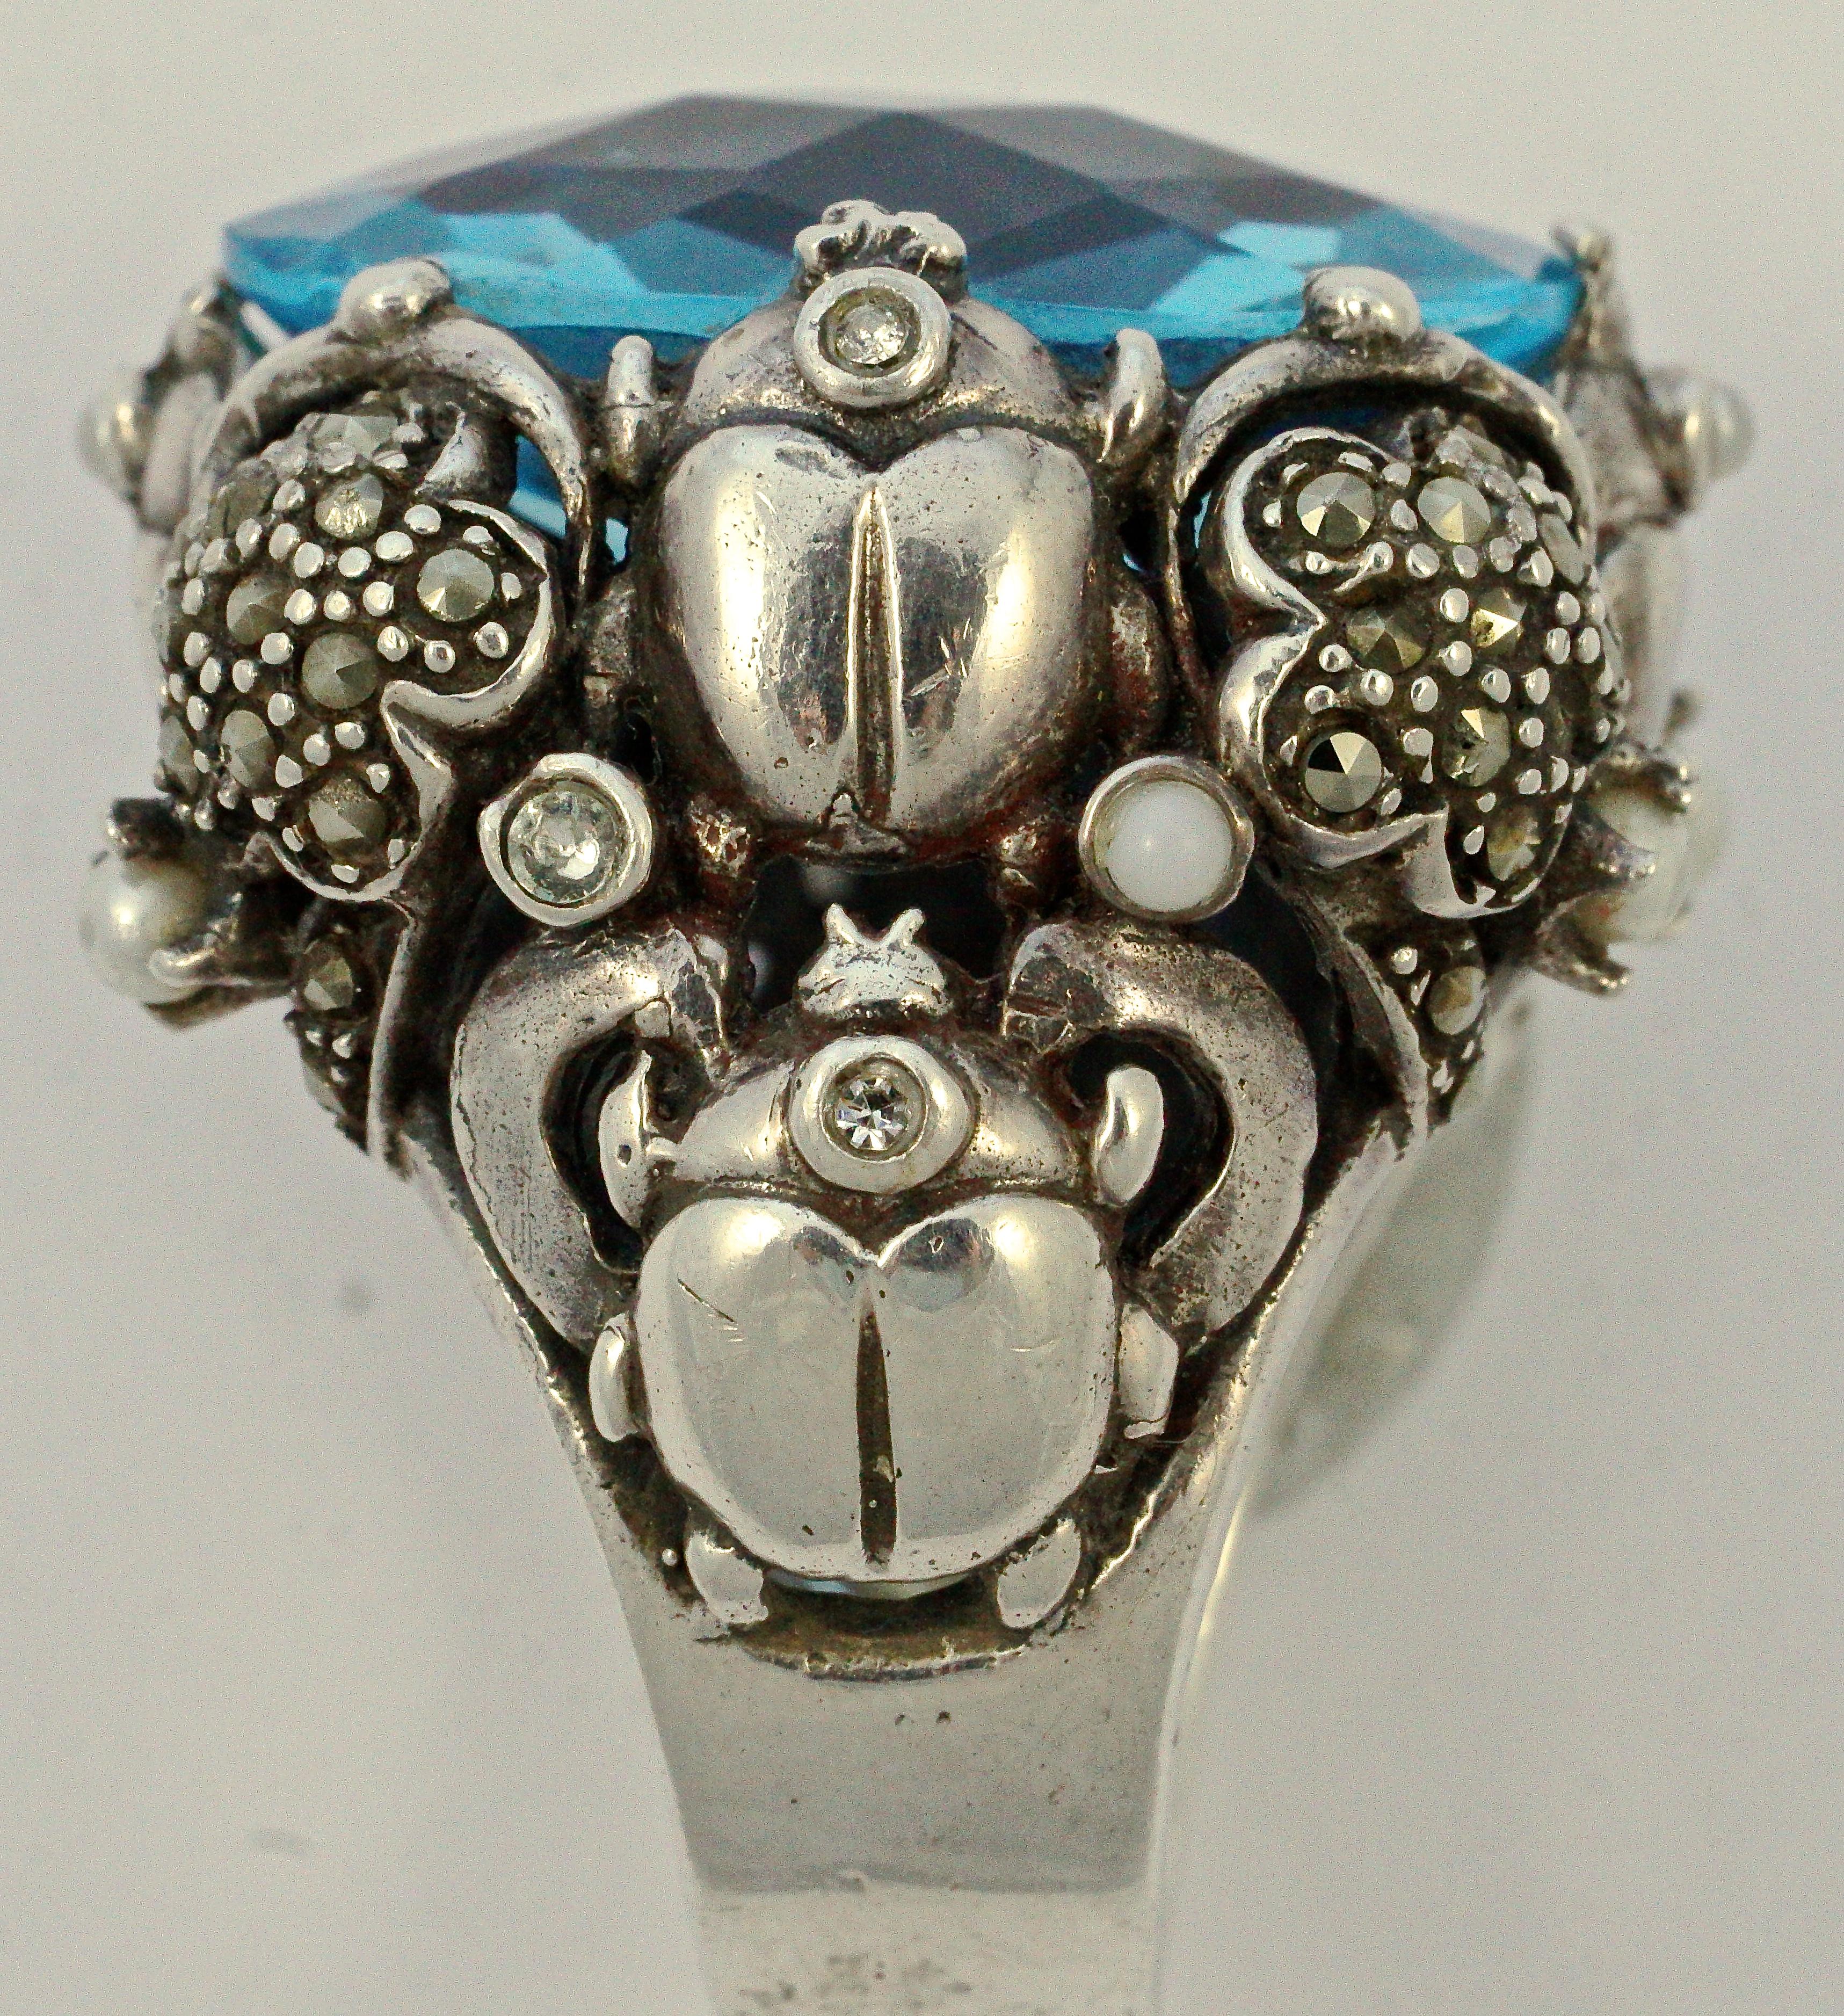 Fabulous silver ring featuring an oval faceted blue glass stone, circa 1970s. The setting has an intricate design with marcasite set flowers, and ladybirds decorated with faux pearls and clear rhinestones. Ring size UK M 1/2, US 6 1/4 (inside